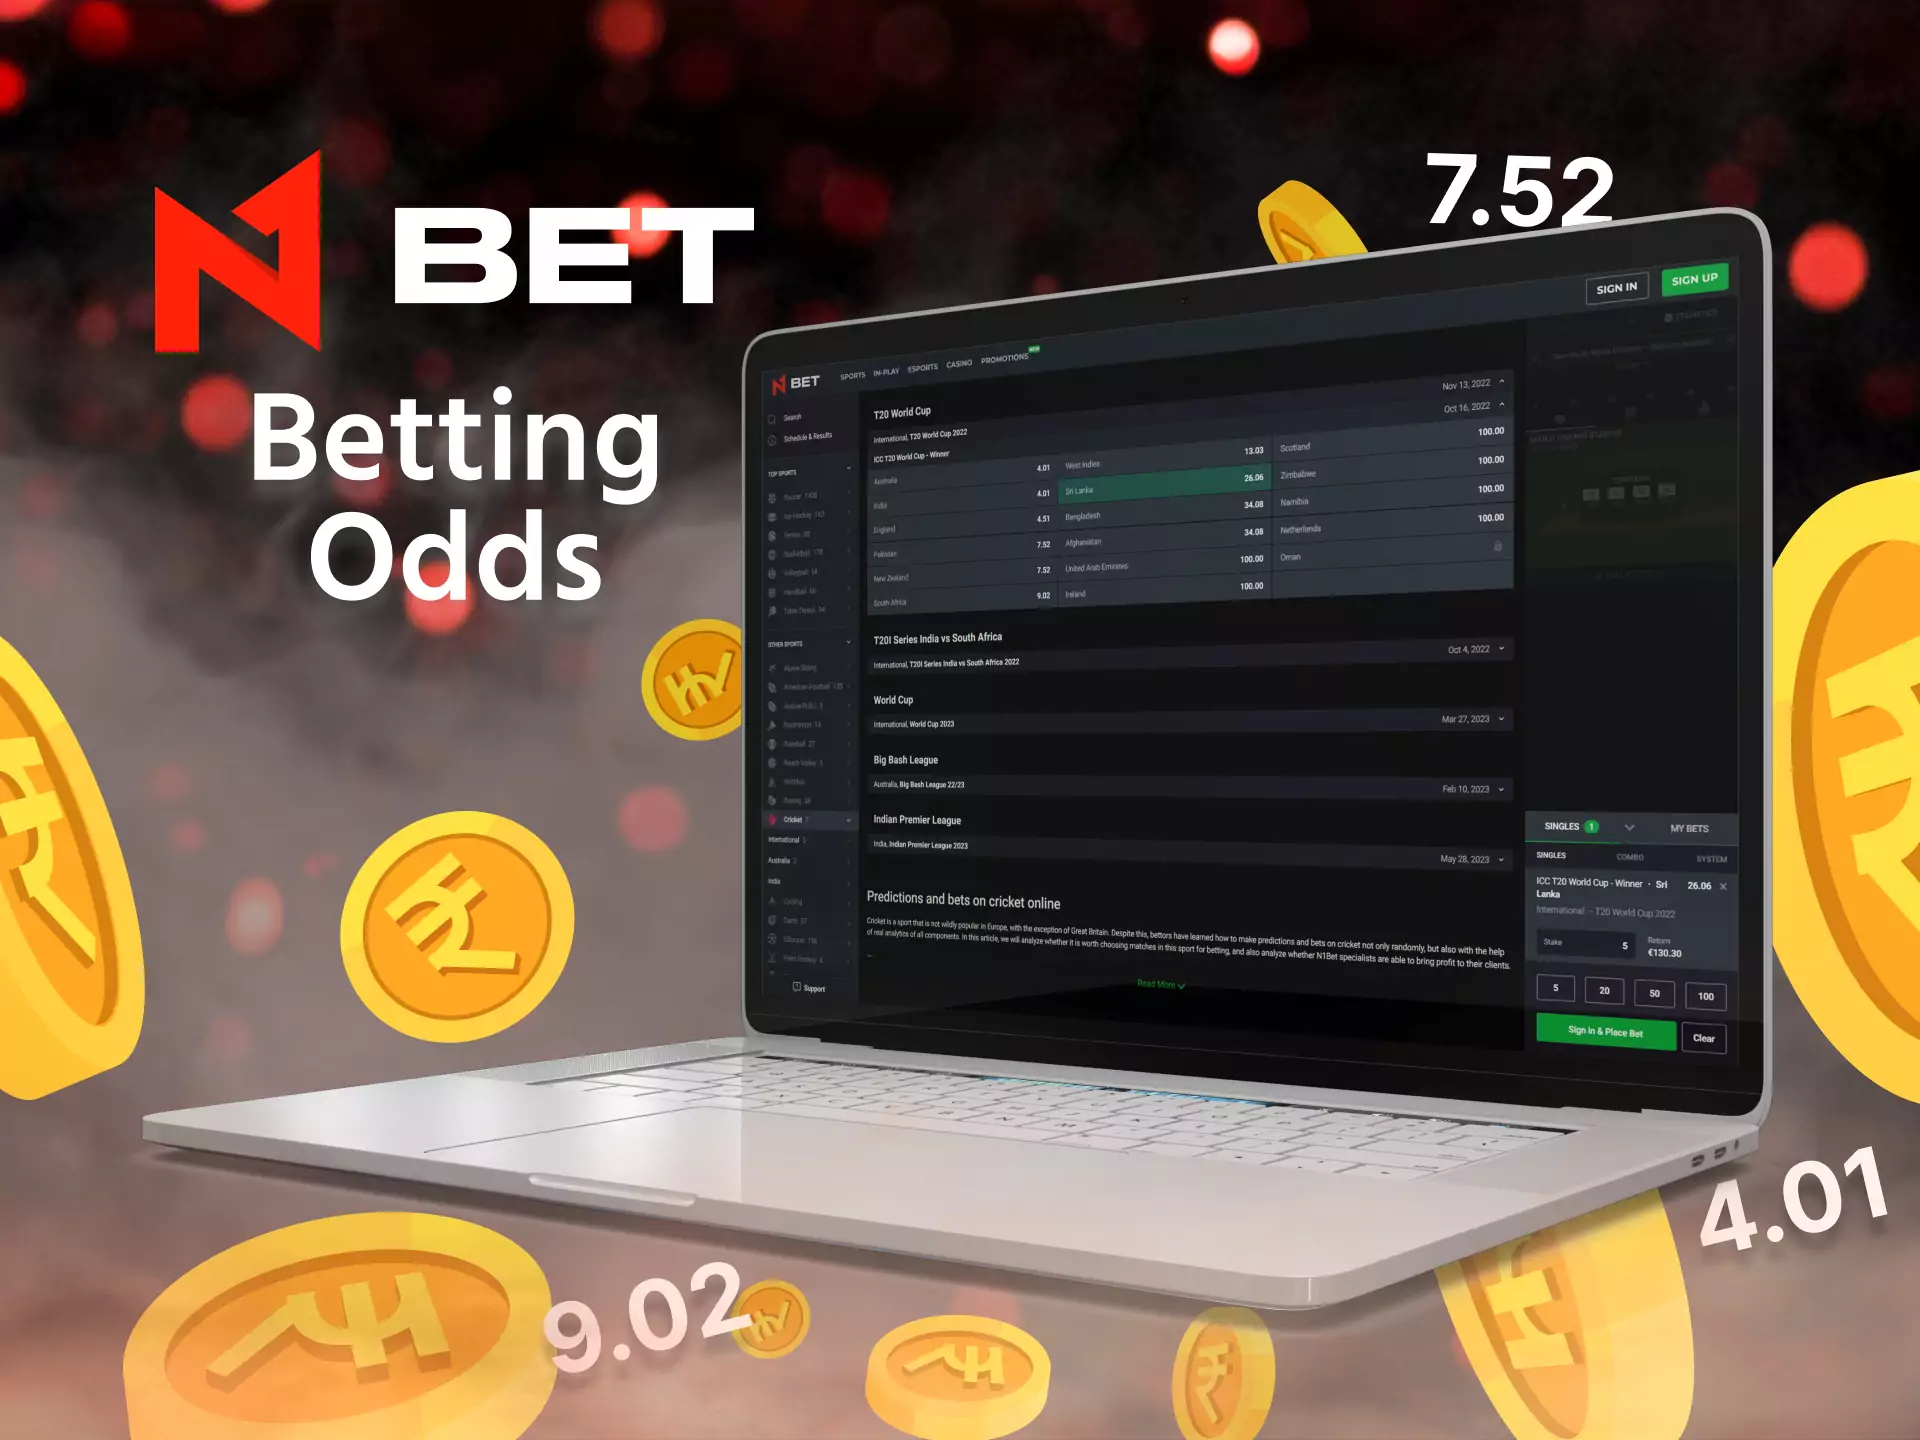 On N1Bet, you find different betting odds.